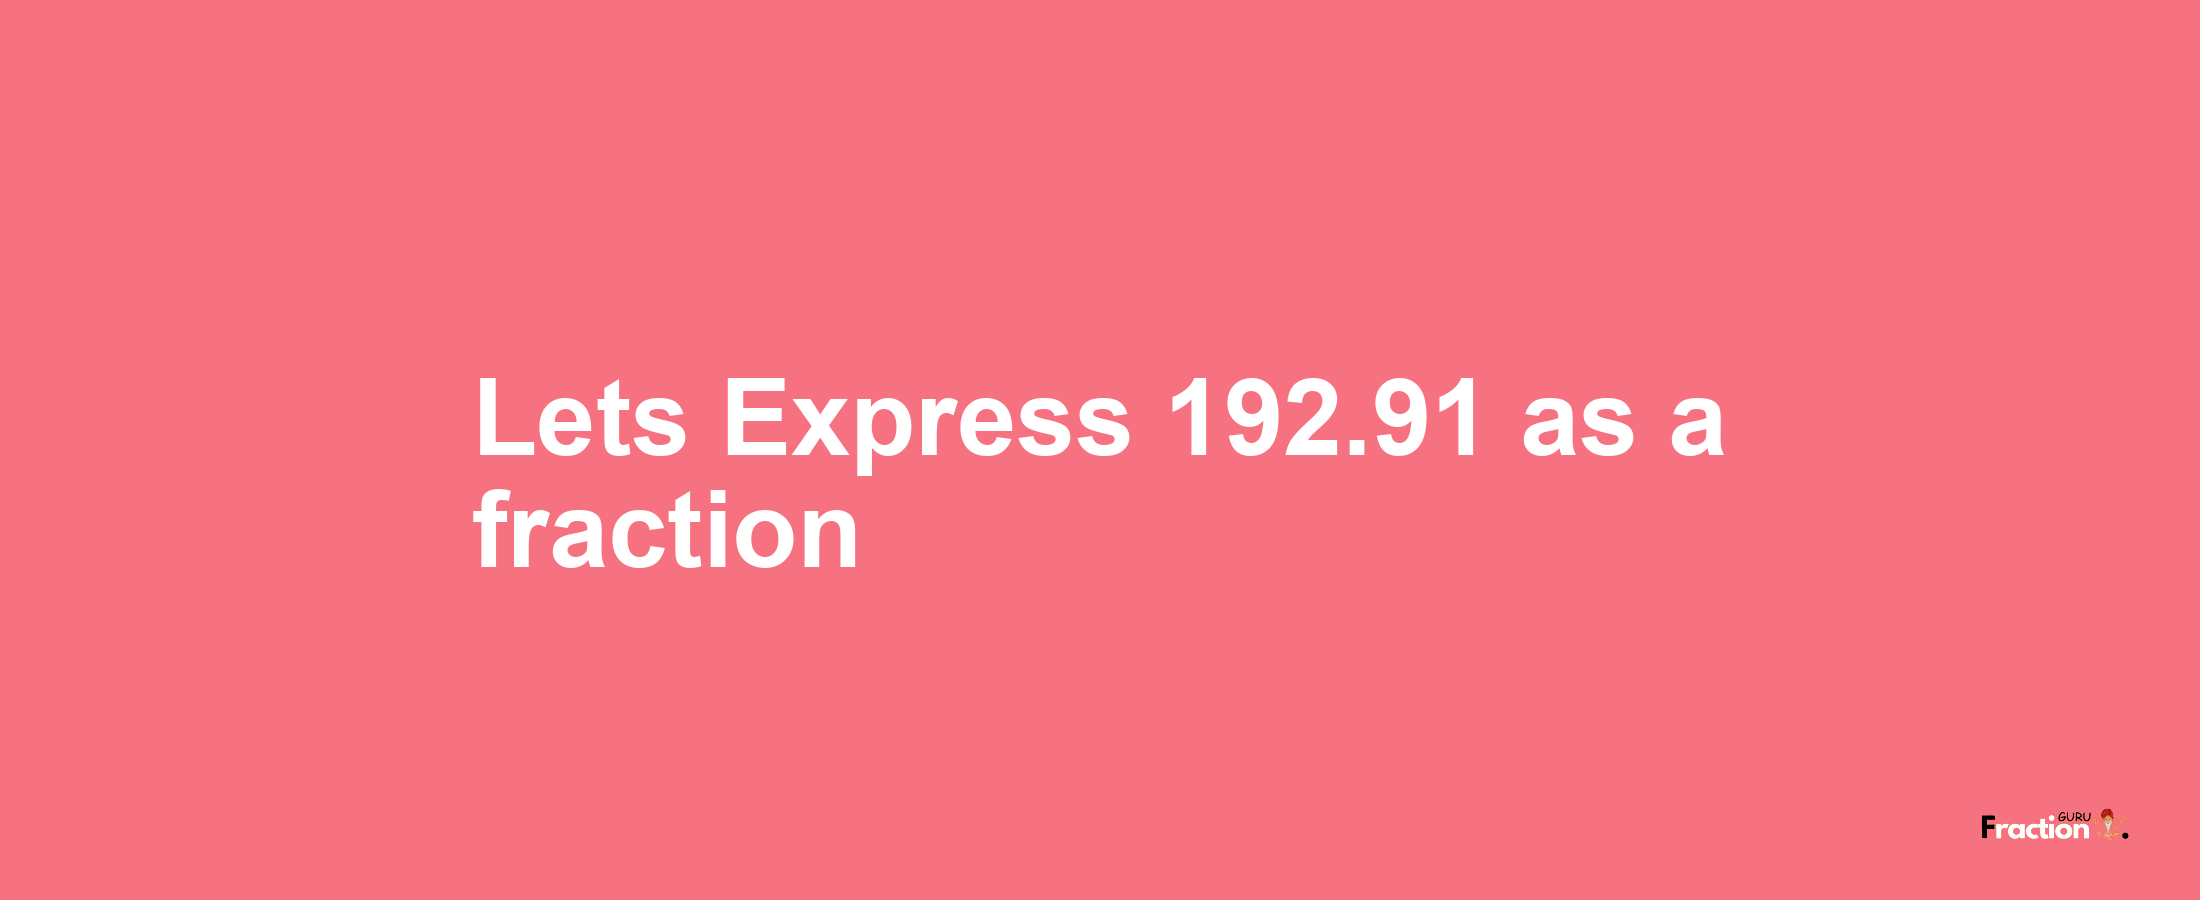 Lets Express 192.91 as afraction